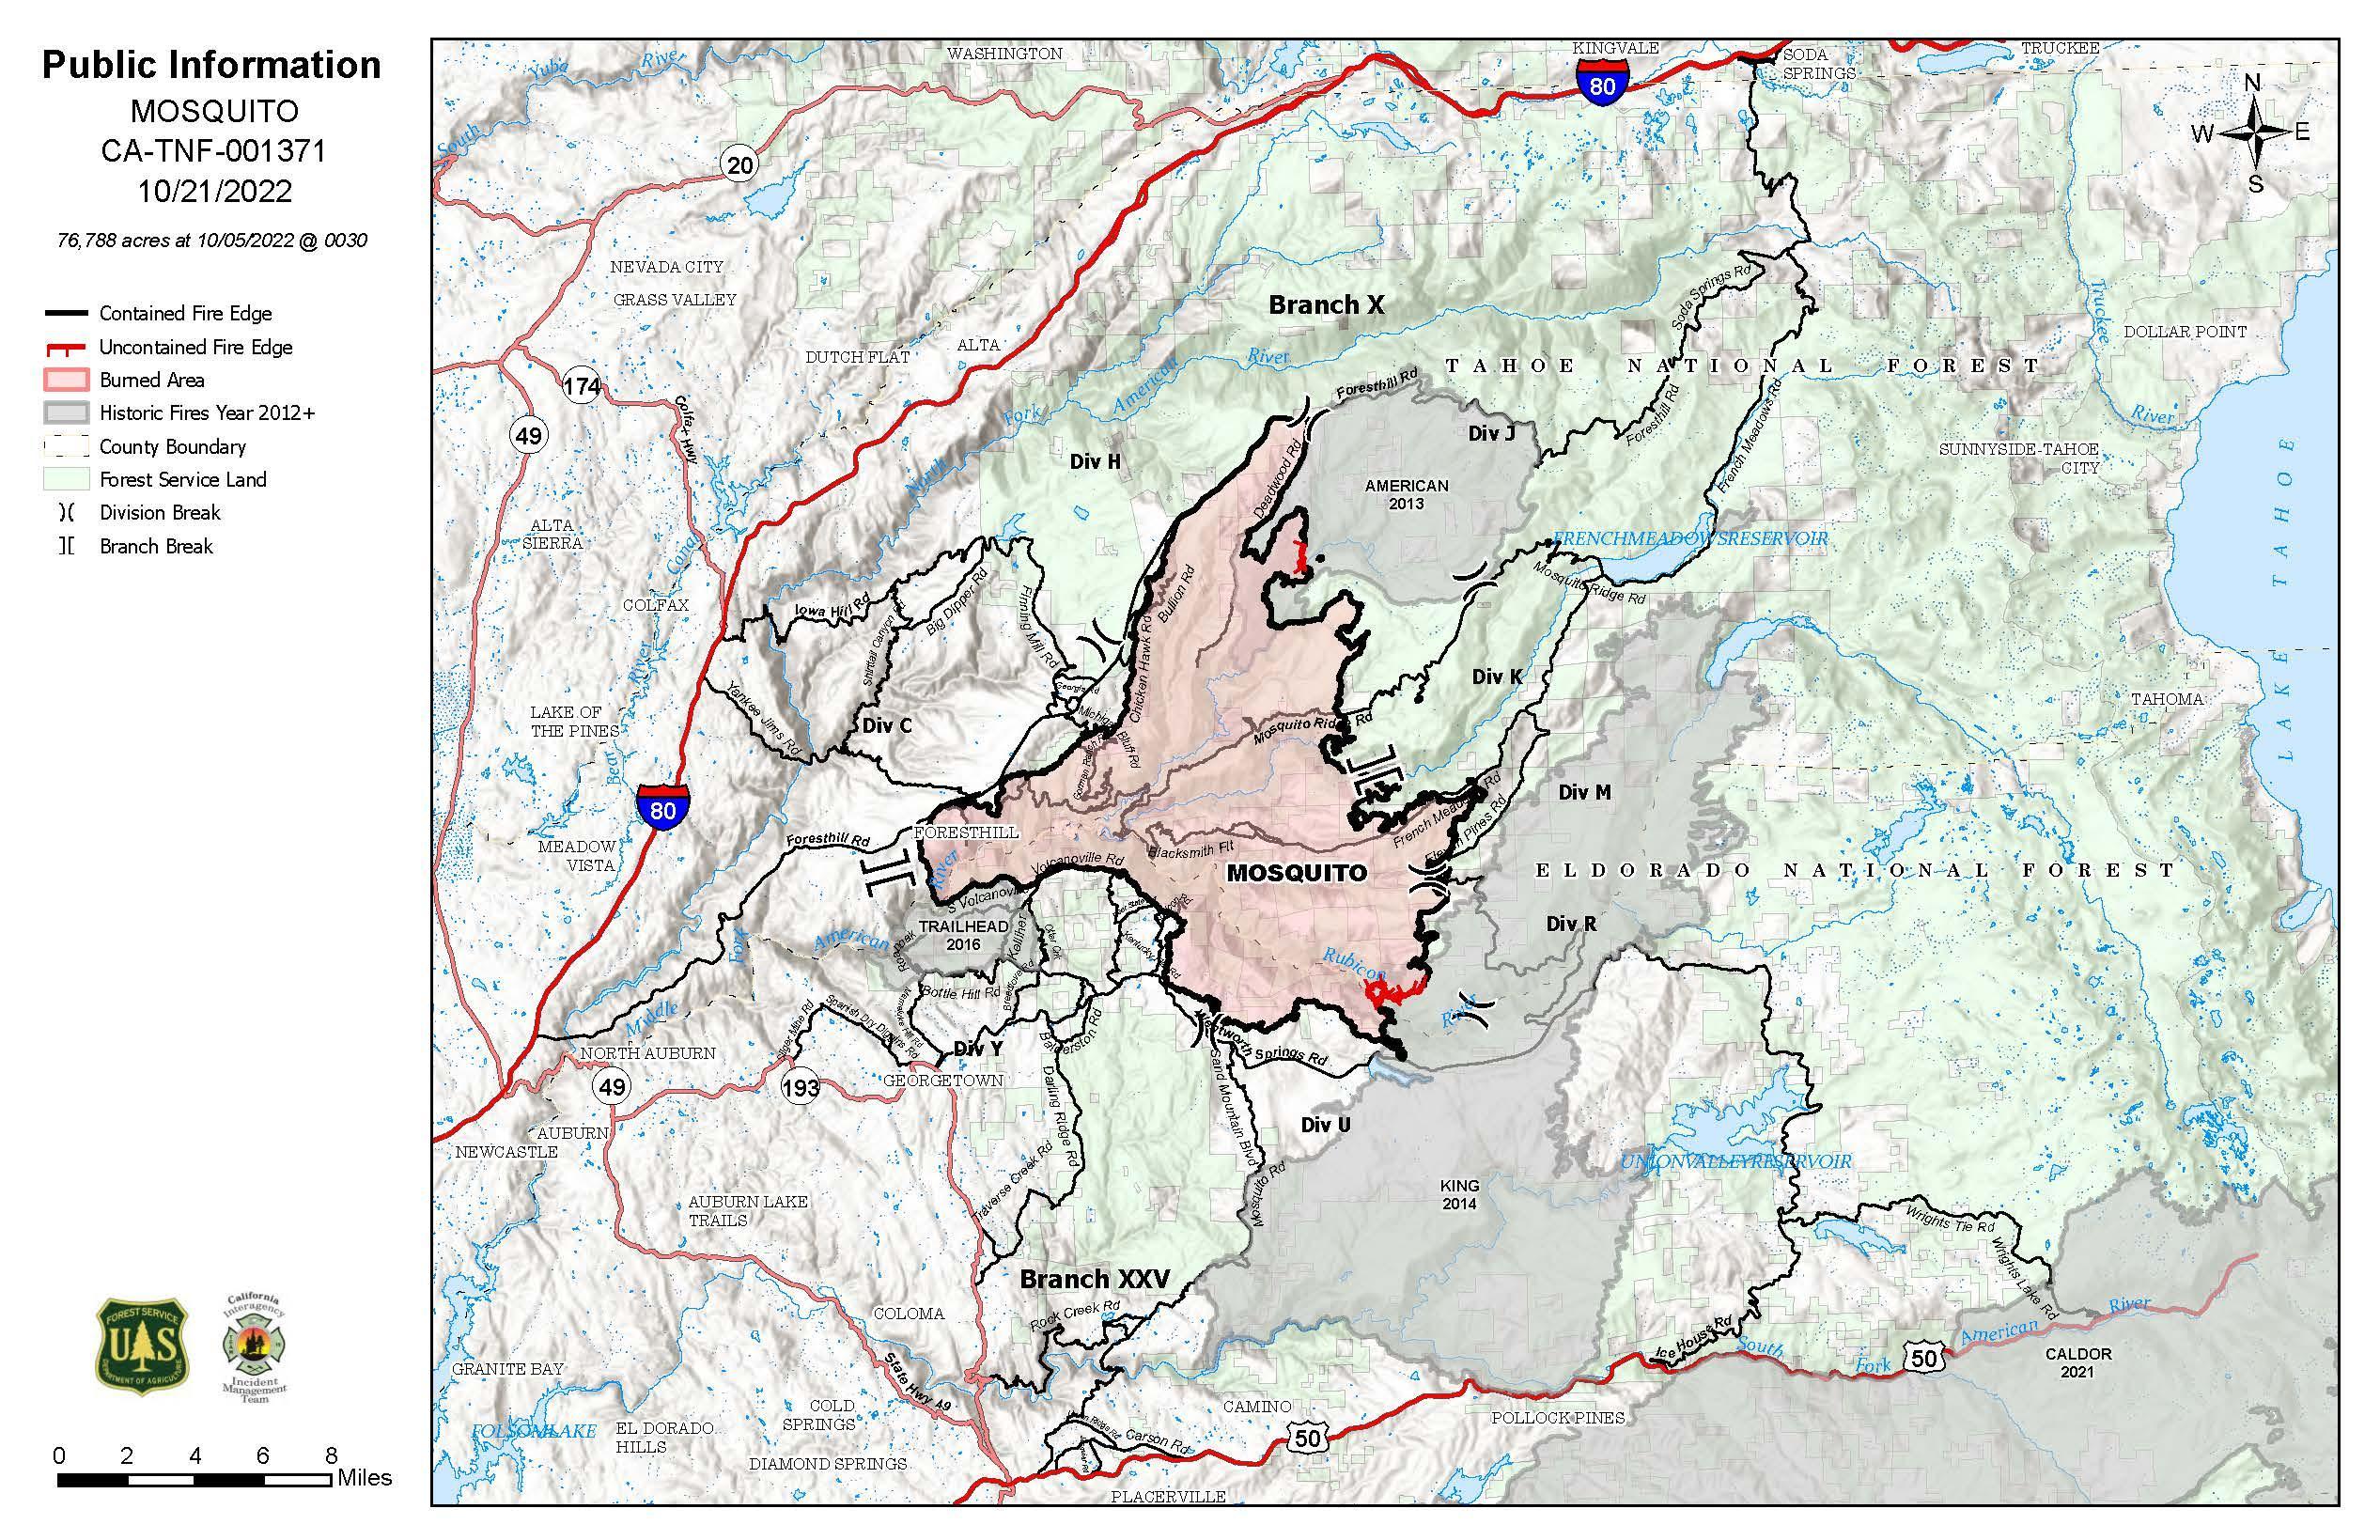 Mosquito Fire Public Information Map (10-21-2022) 